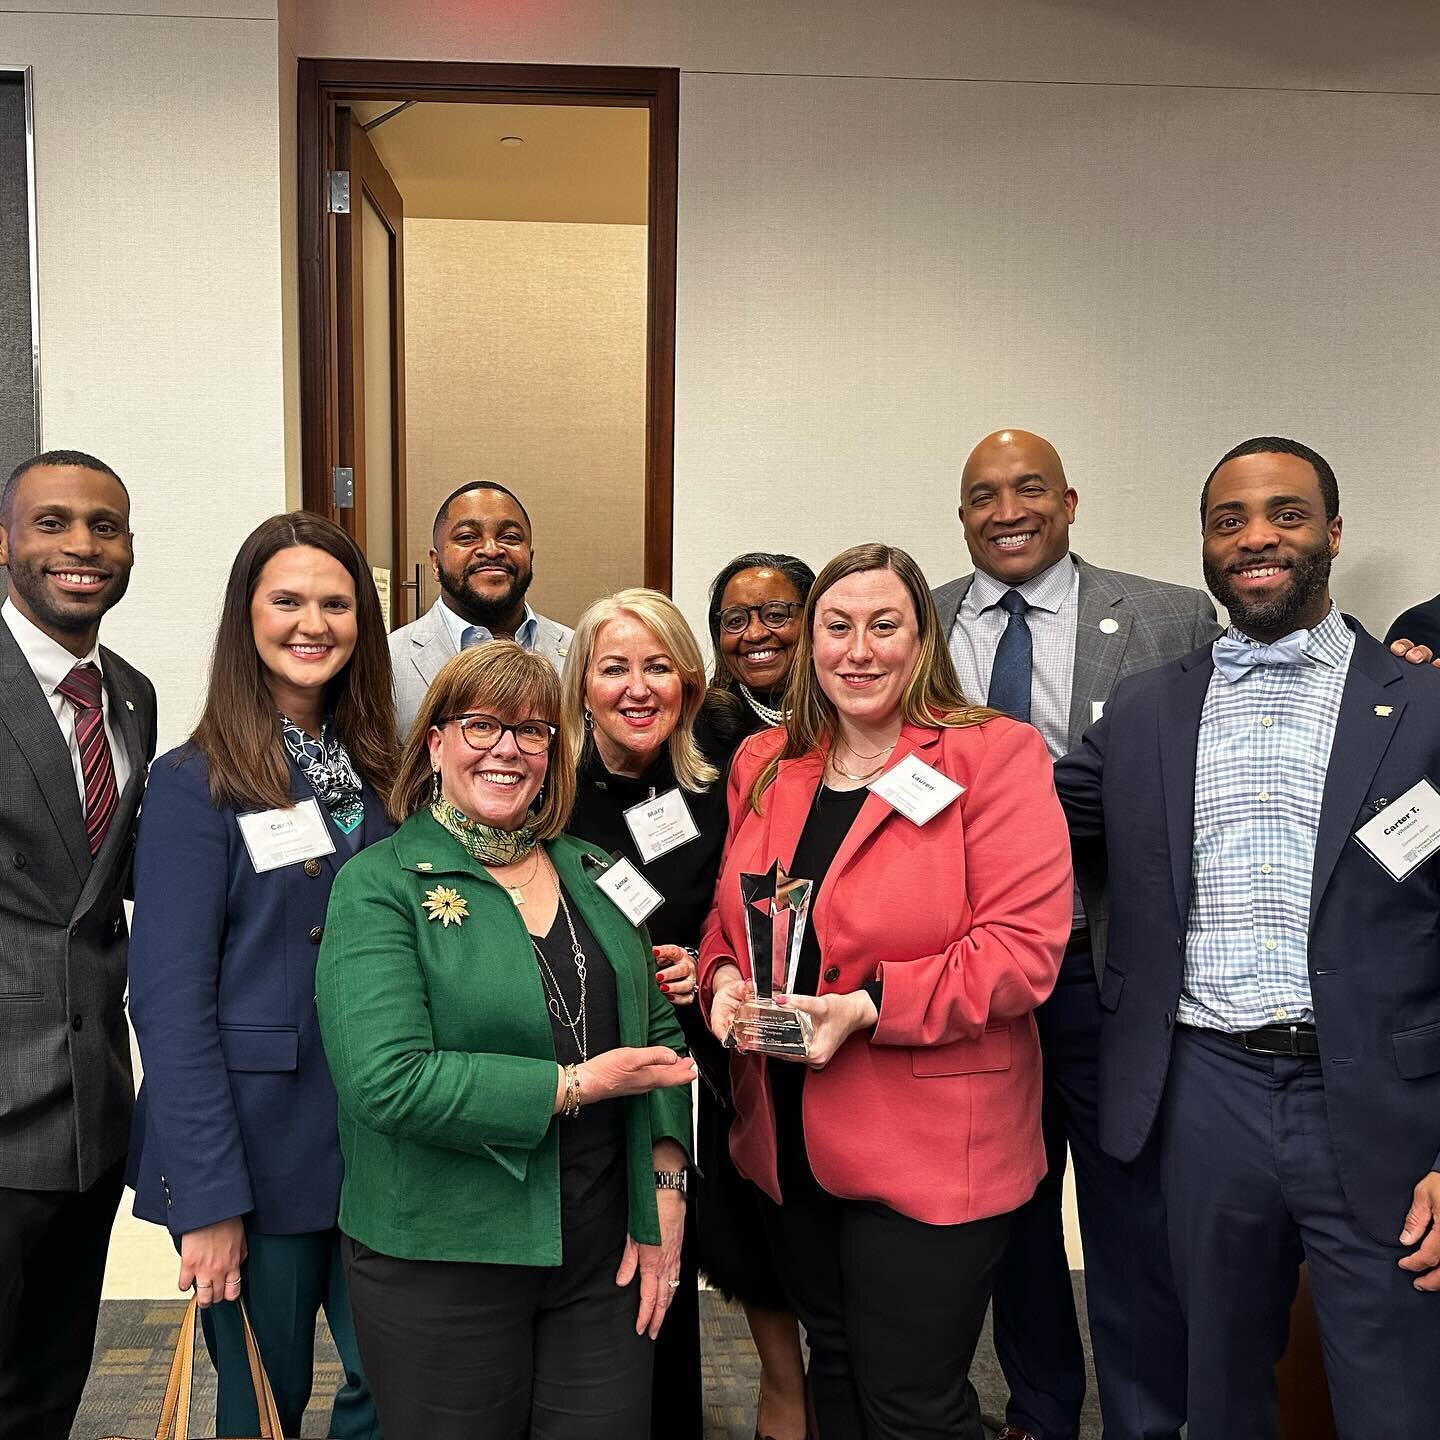 The Annual  @sorenseninstituteuva Legislative Reception meant a little more this year as we celebrated the amazing @laurengilbert10. 

And of course the PLP&rsquo;22 cohort is the best!